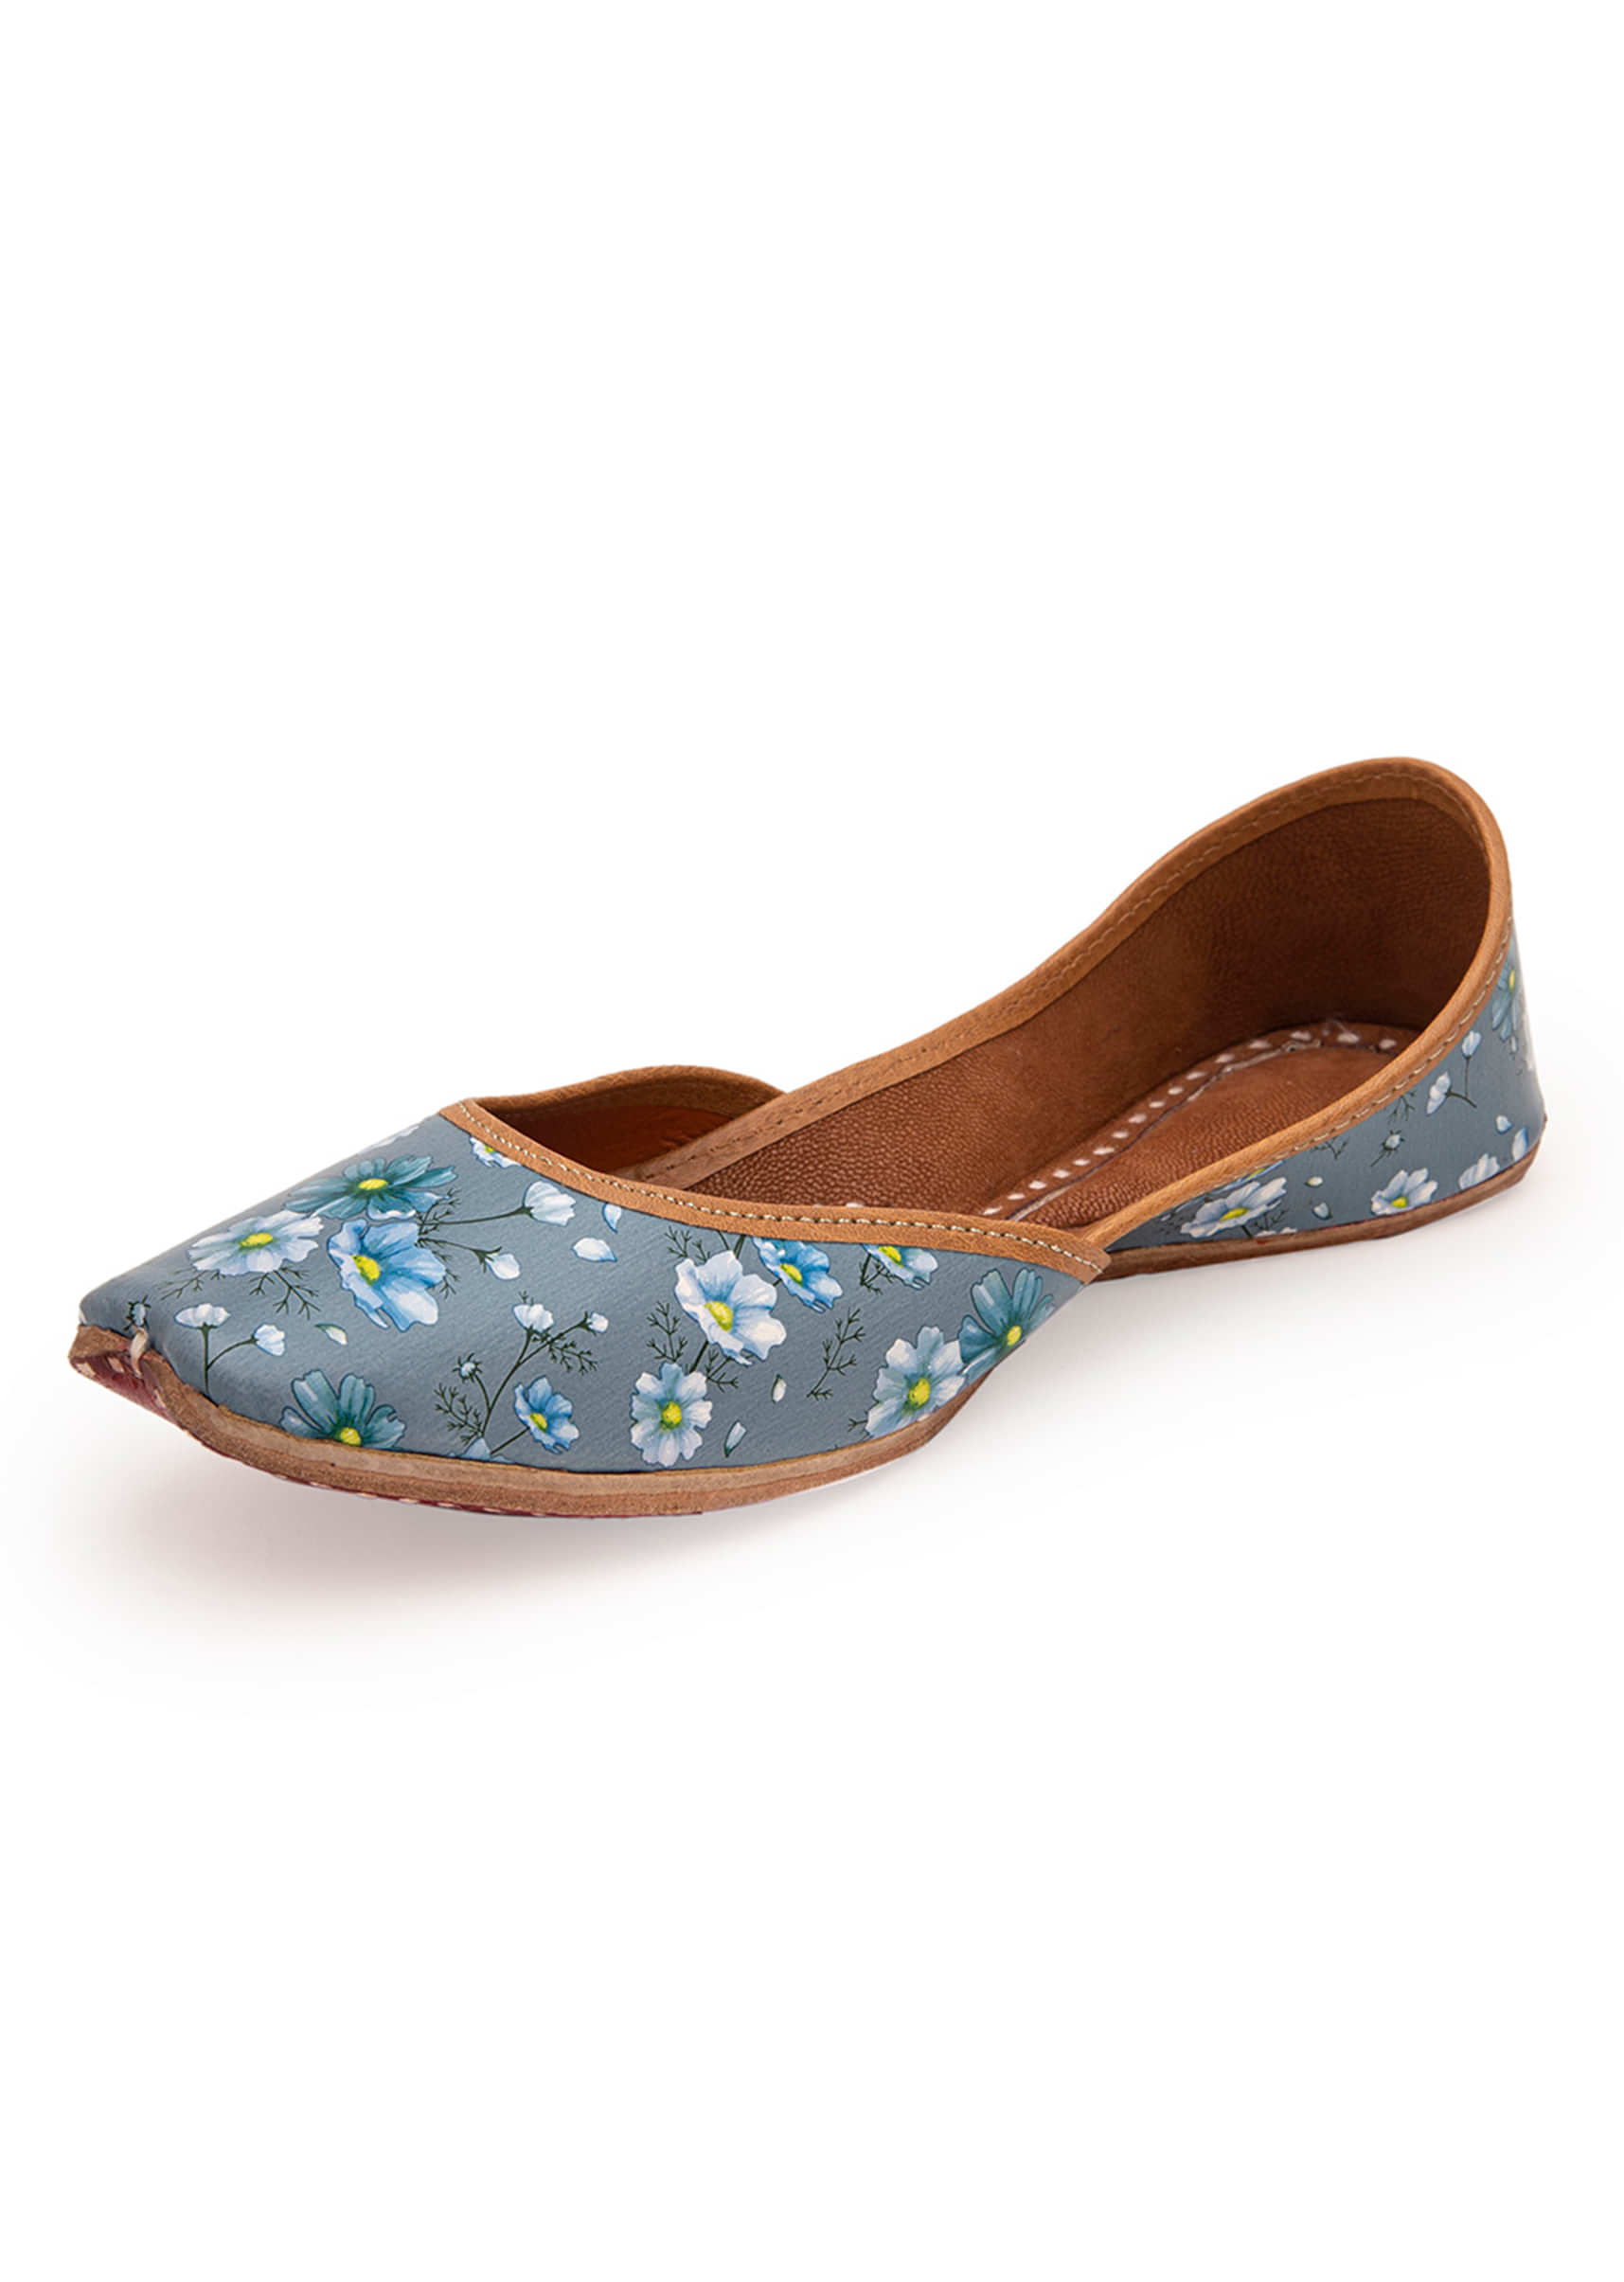 Blue Juttis In Floral Theme With Digital Floral Print In Leather